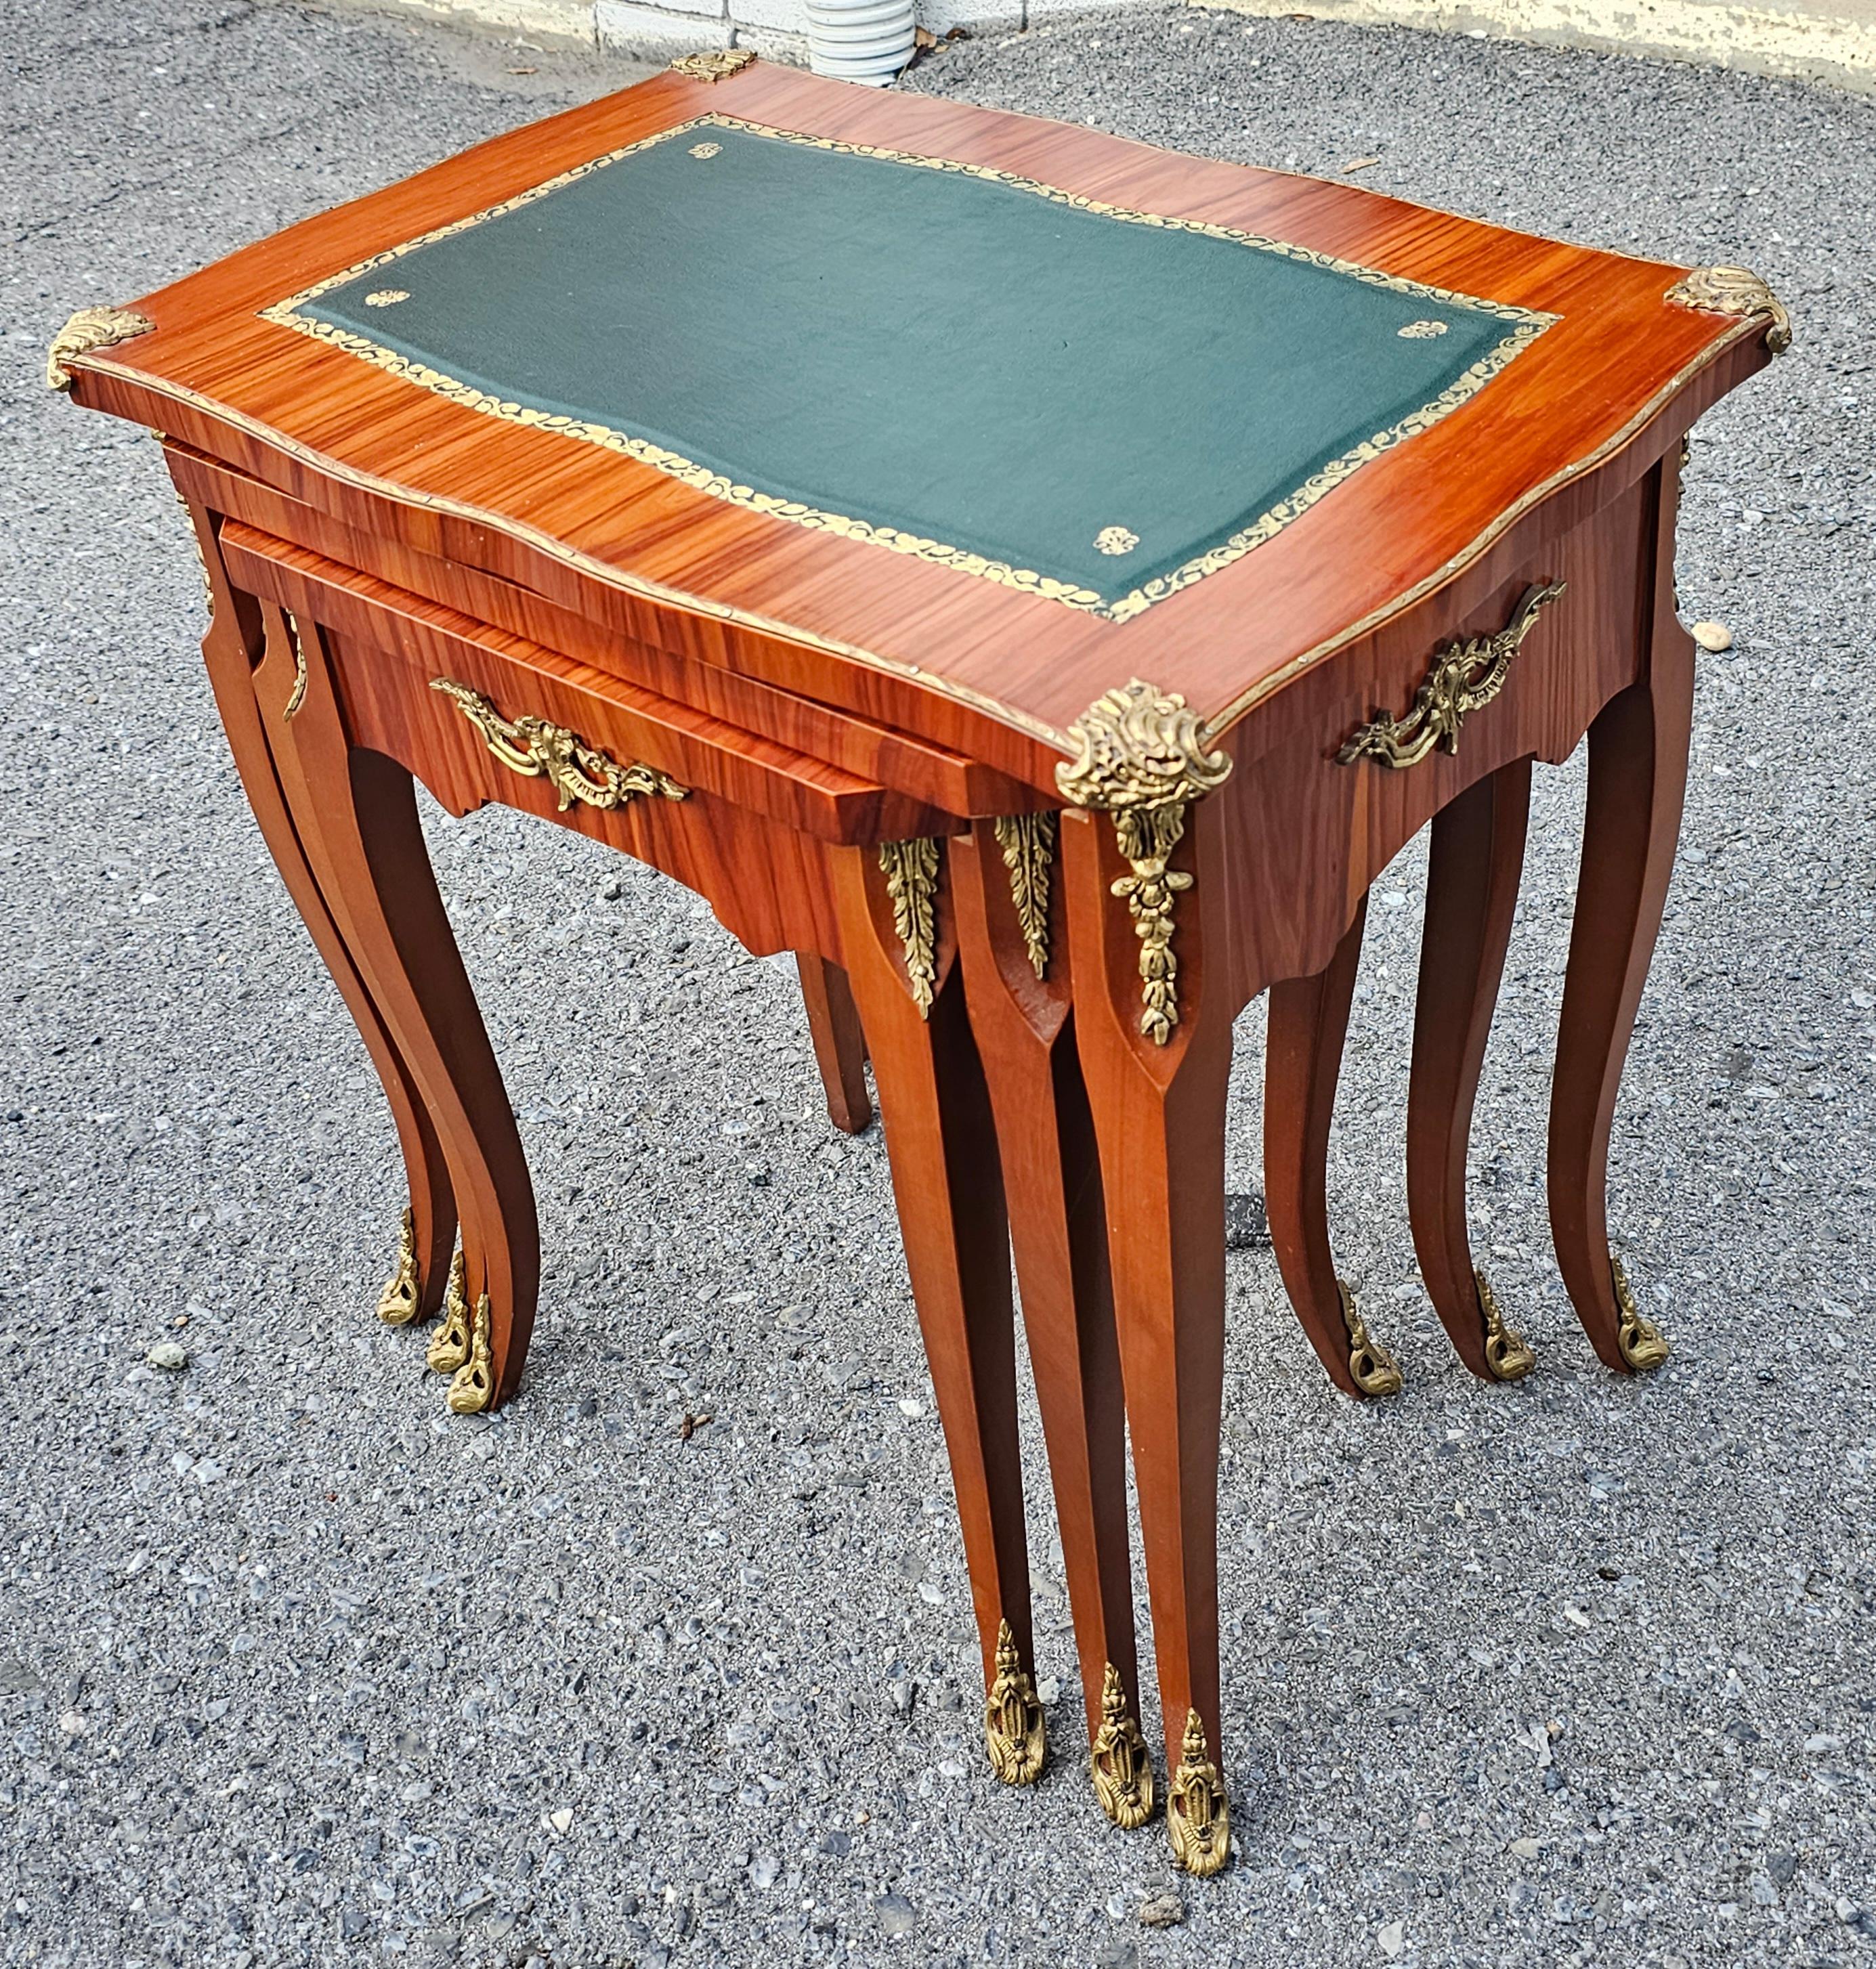 A Stunning Set of 3 Binda Collection Italian Louis XV Ormolu Mounted and Leather Inset Nesting Tables in great vintage condition.
Measures:
22.25